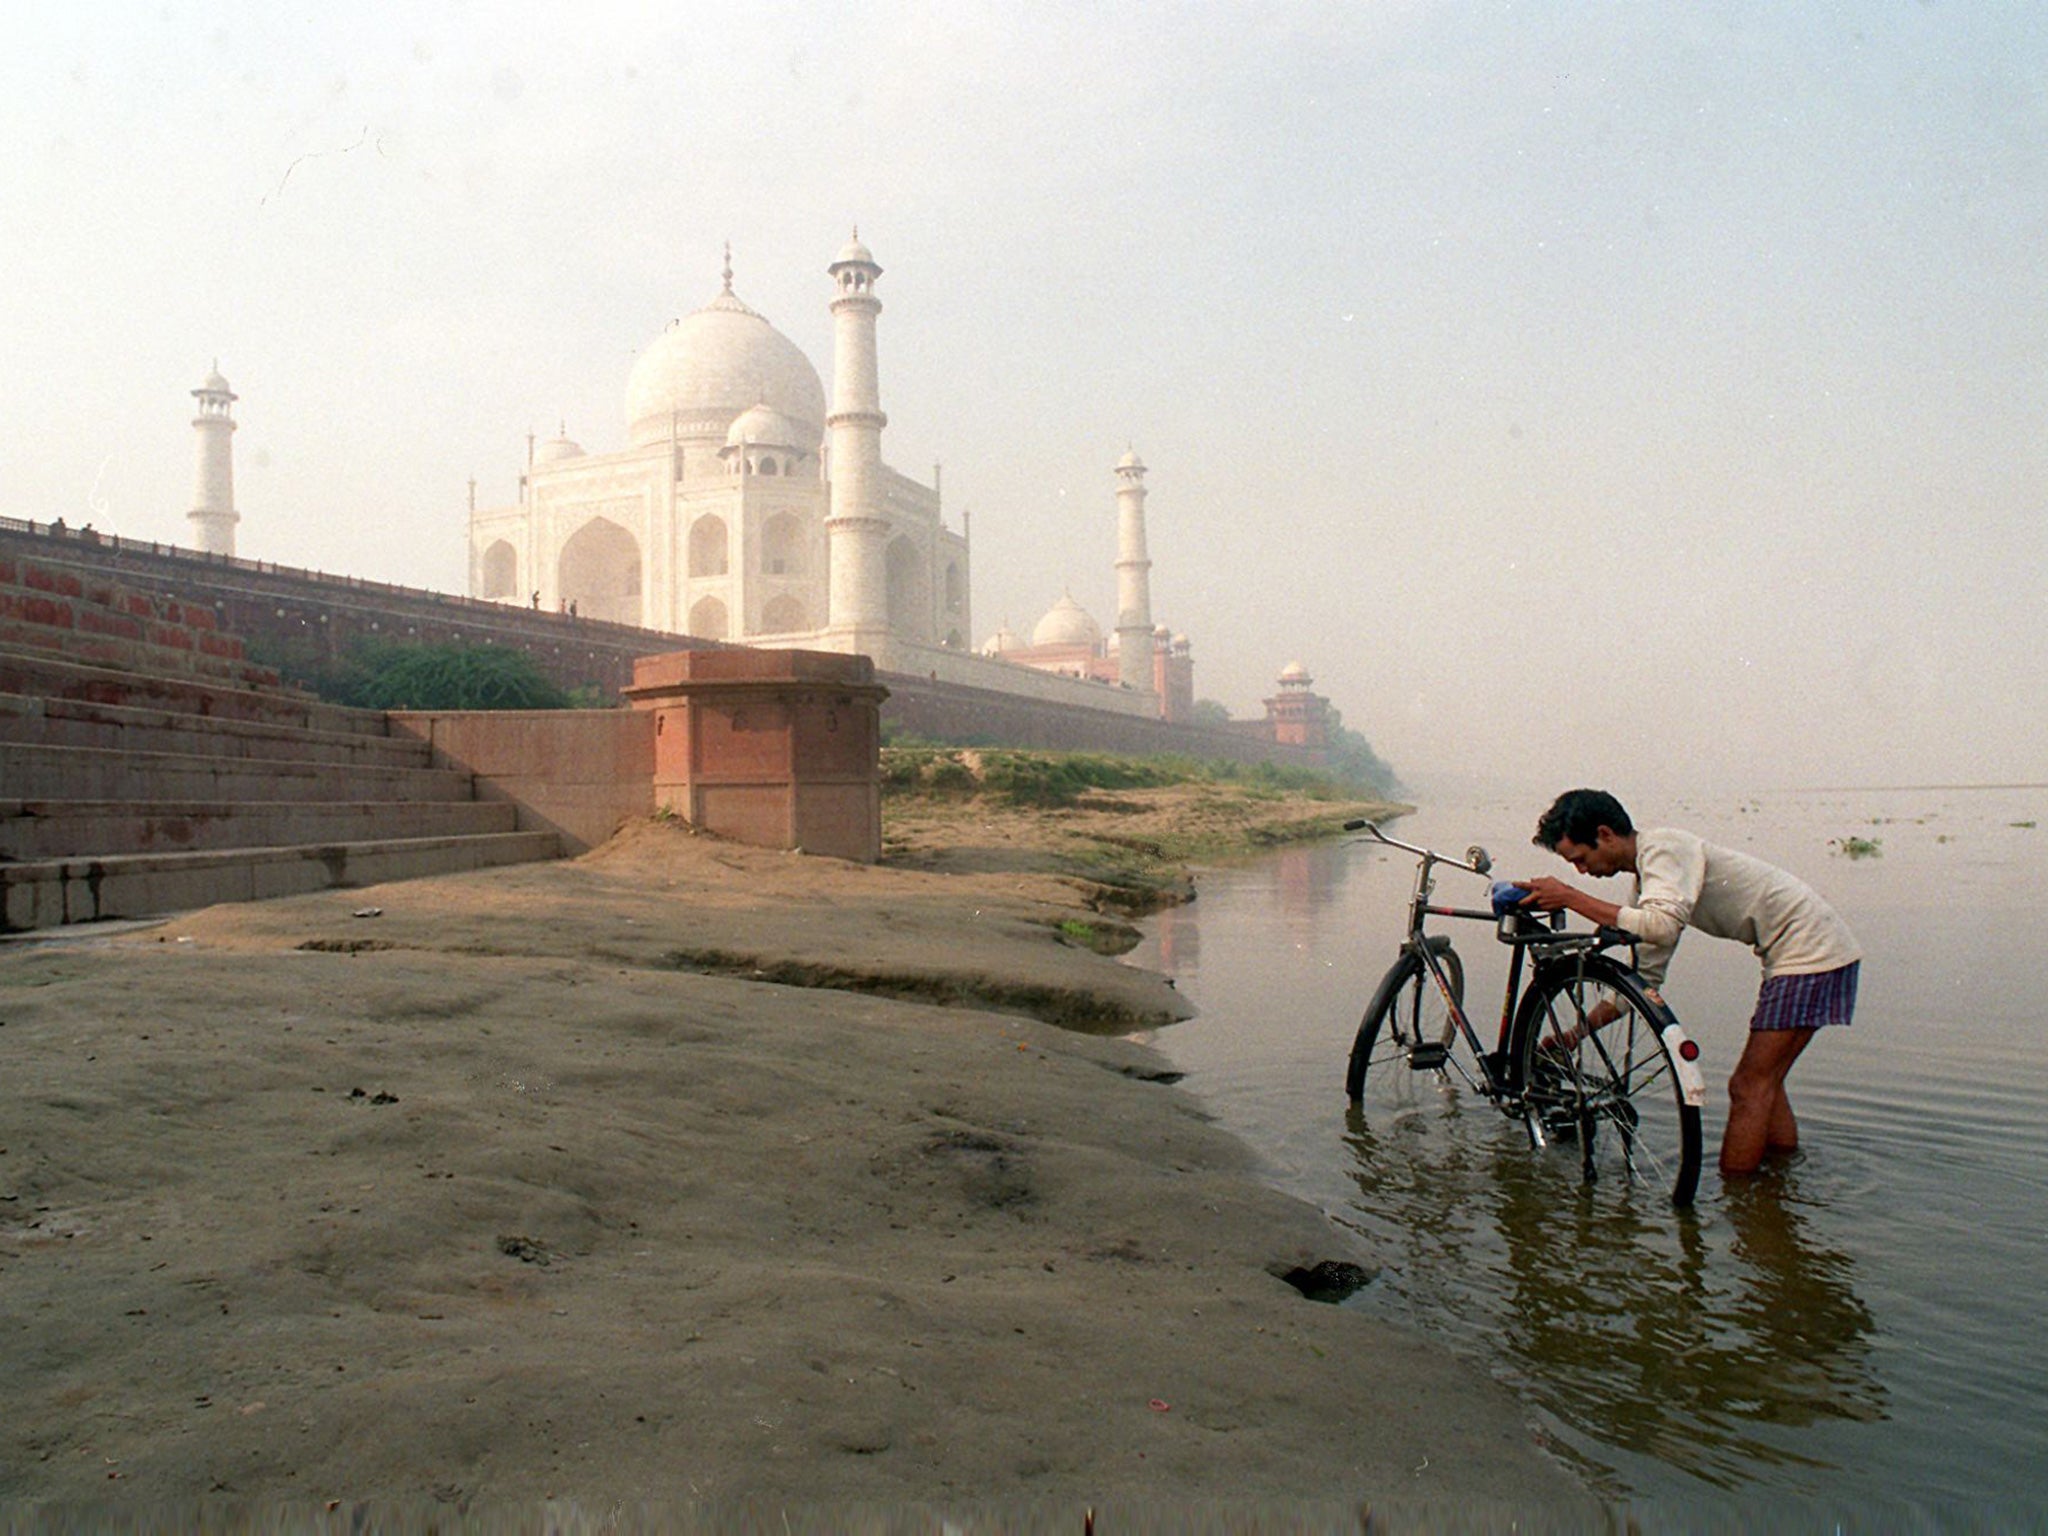 Indian judges also criticised the appearance of several buildings near the Taj Mahal in Agra